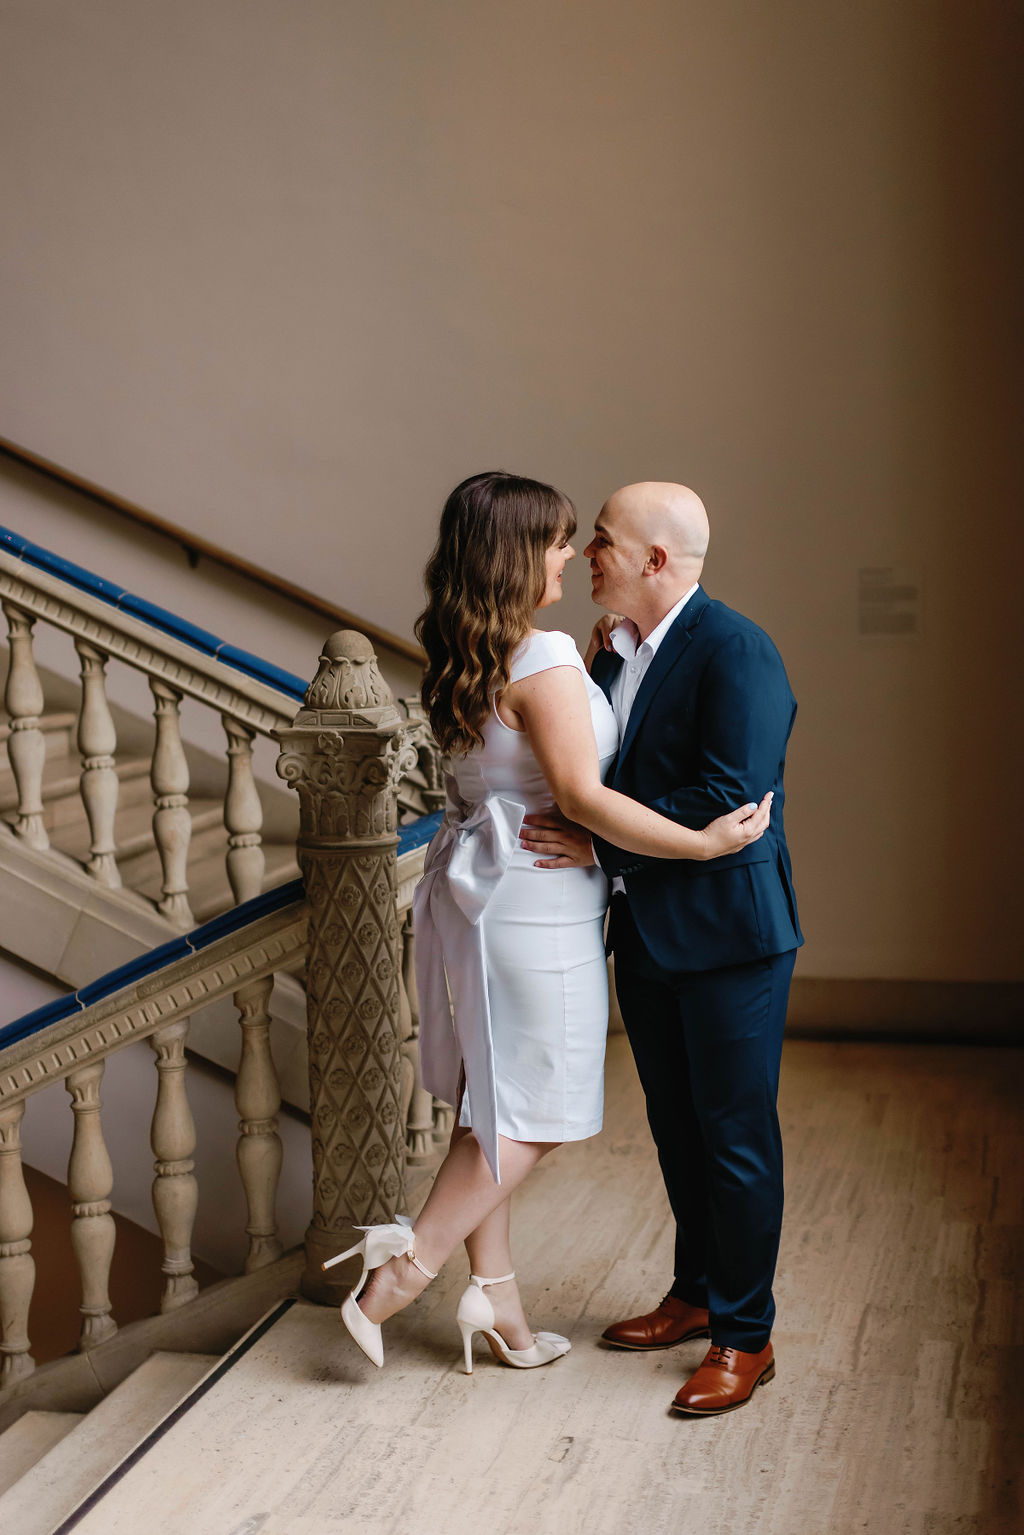 Engagement photo of Jimmy and Hannah at stairwell by the  bannister of the stairs at San Diego Museum of art. |Photo by California Photographer Sarah Block Photography